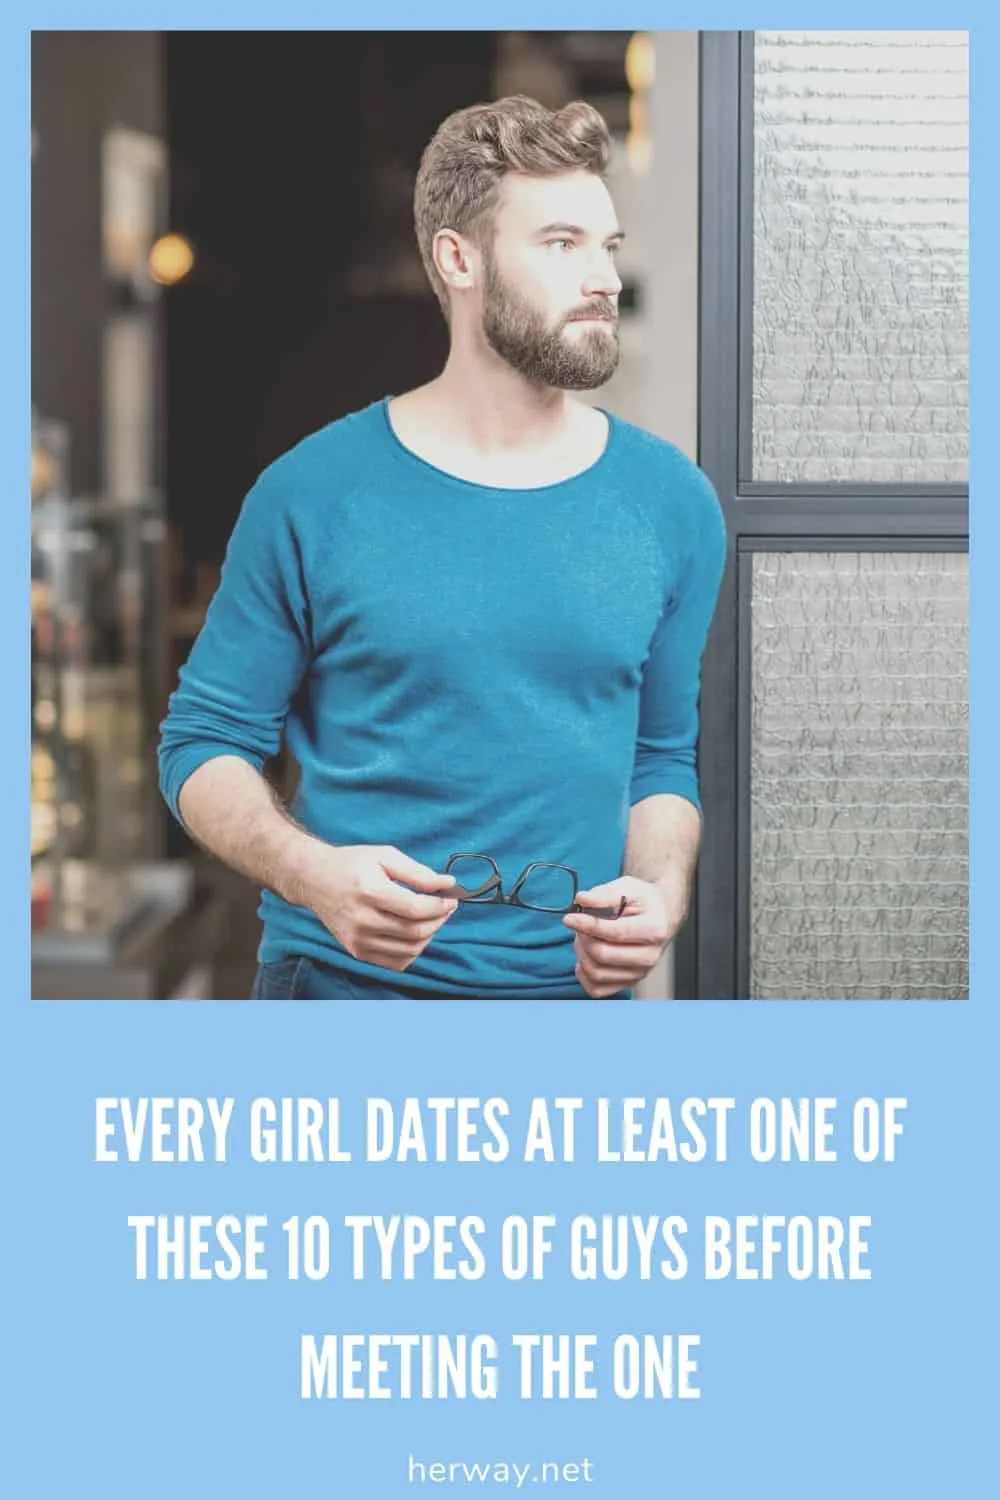 Every Girl Dates At Least 1 Of These 10 Types Of Guys Before Meeting The One